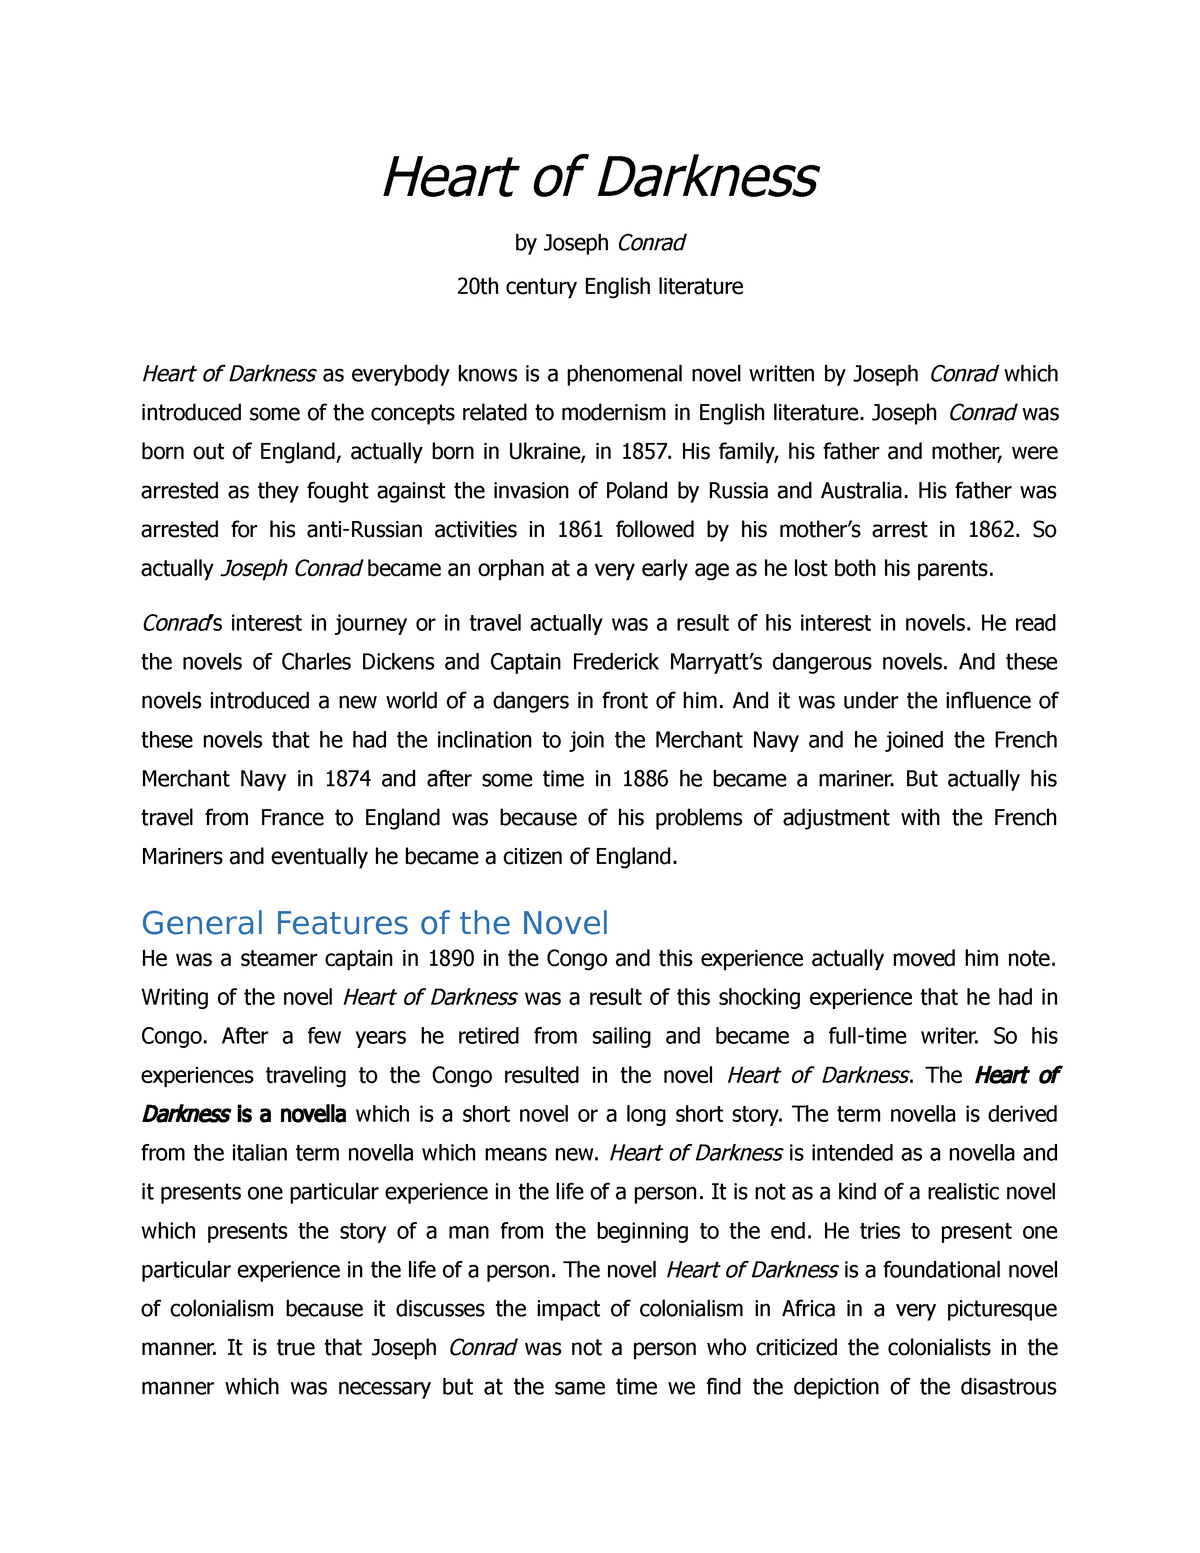 the heart of darkness essay